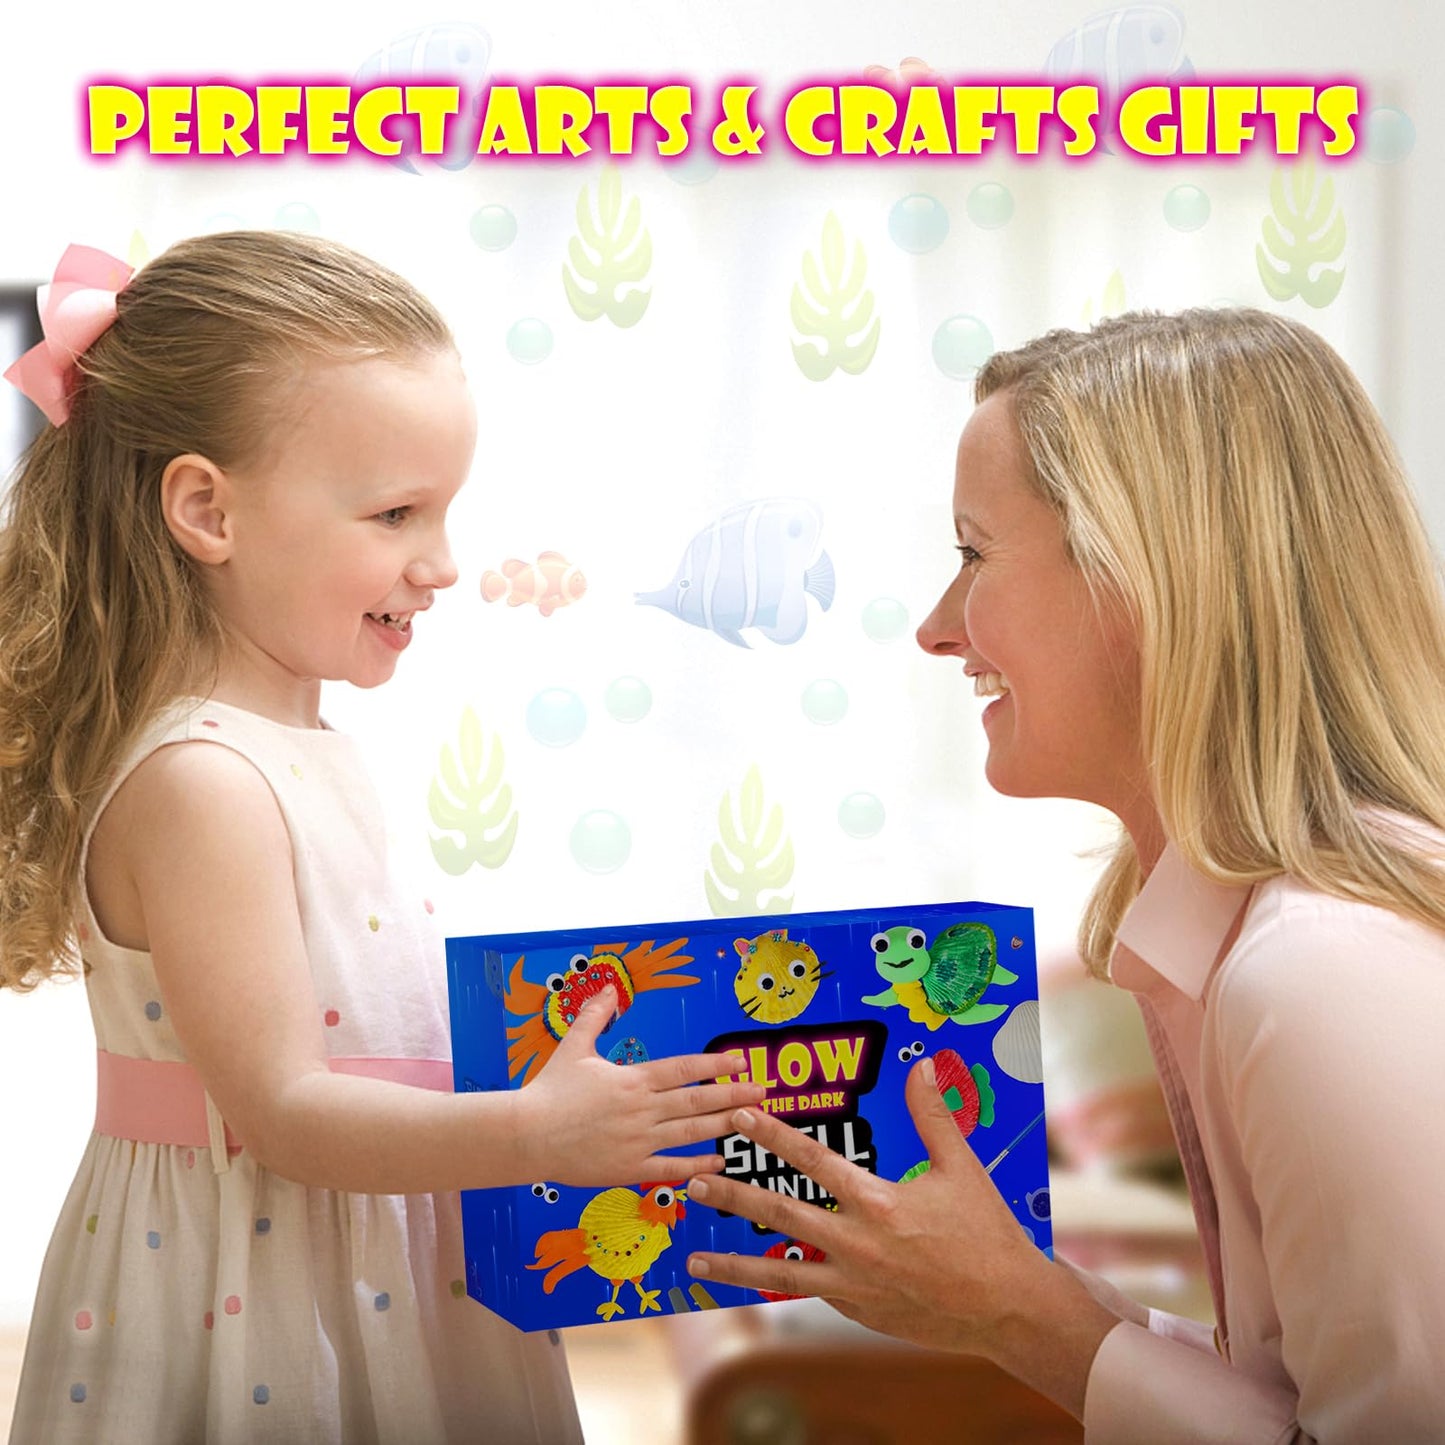 Kids Sea Shell Painting Kit Arts and Crafts Gifts for Boys Girls Glow in The Dark Craft Activities Kits Creative Art Toys for 4 5 6 7 8 9 10 11 12